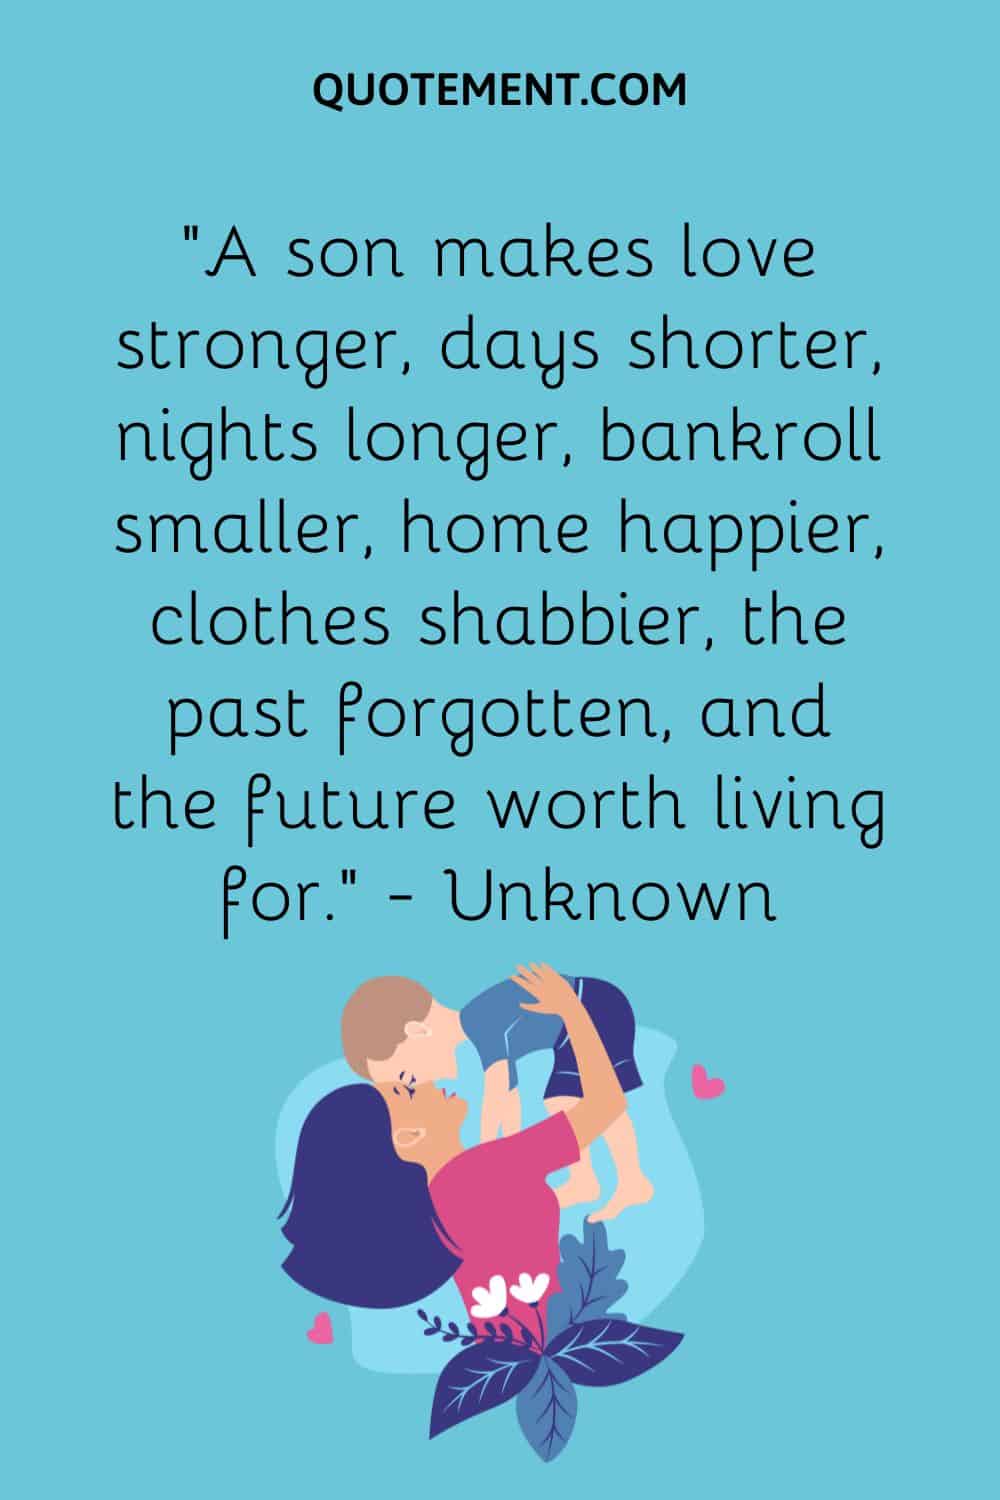 “A son makes love stronger, days shorter, nights longer, bankroll smaller, home happier, clothes shabbier, the past forgotten, and the future worth living for.” — Unknown